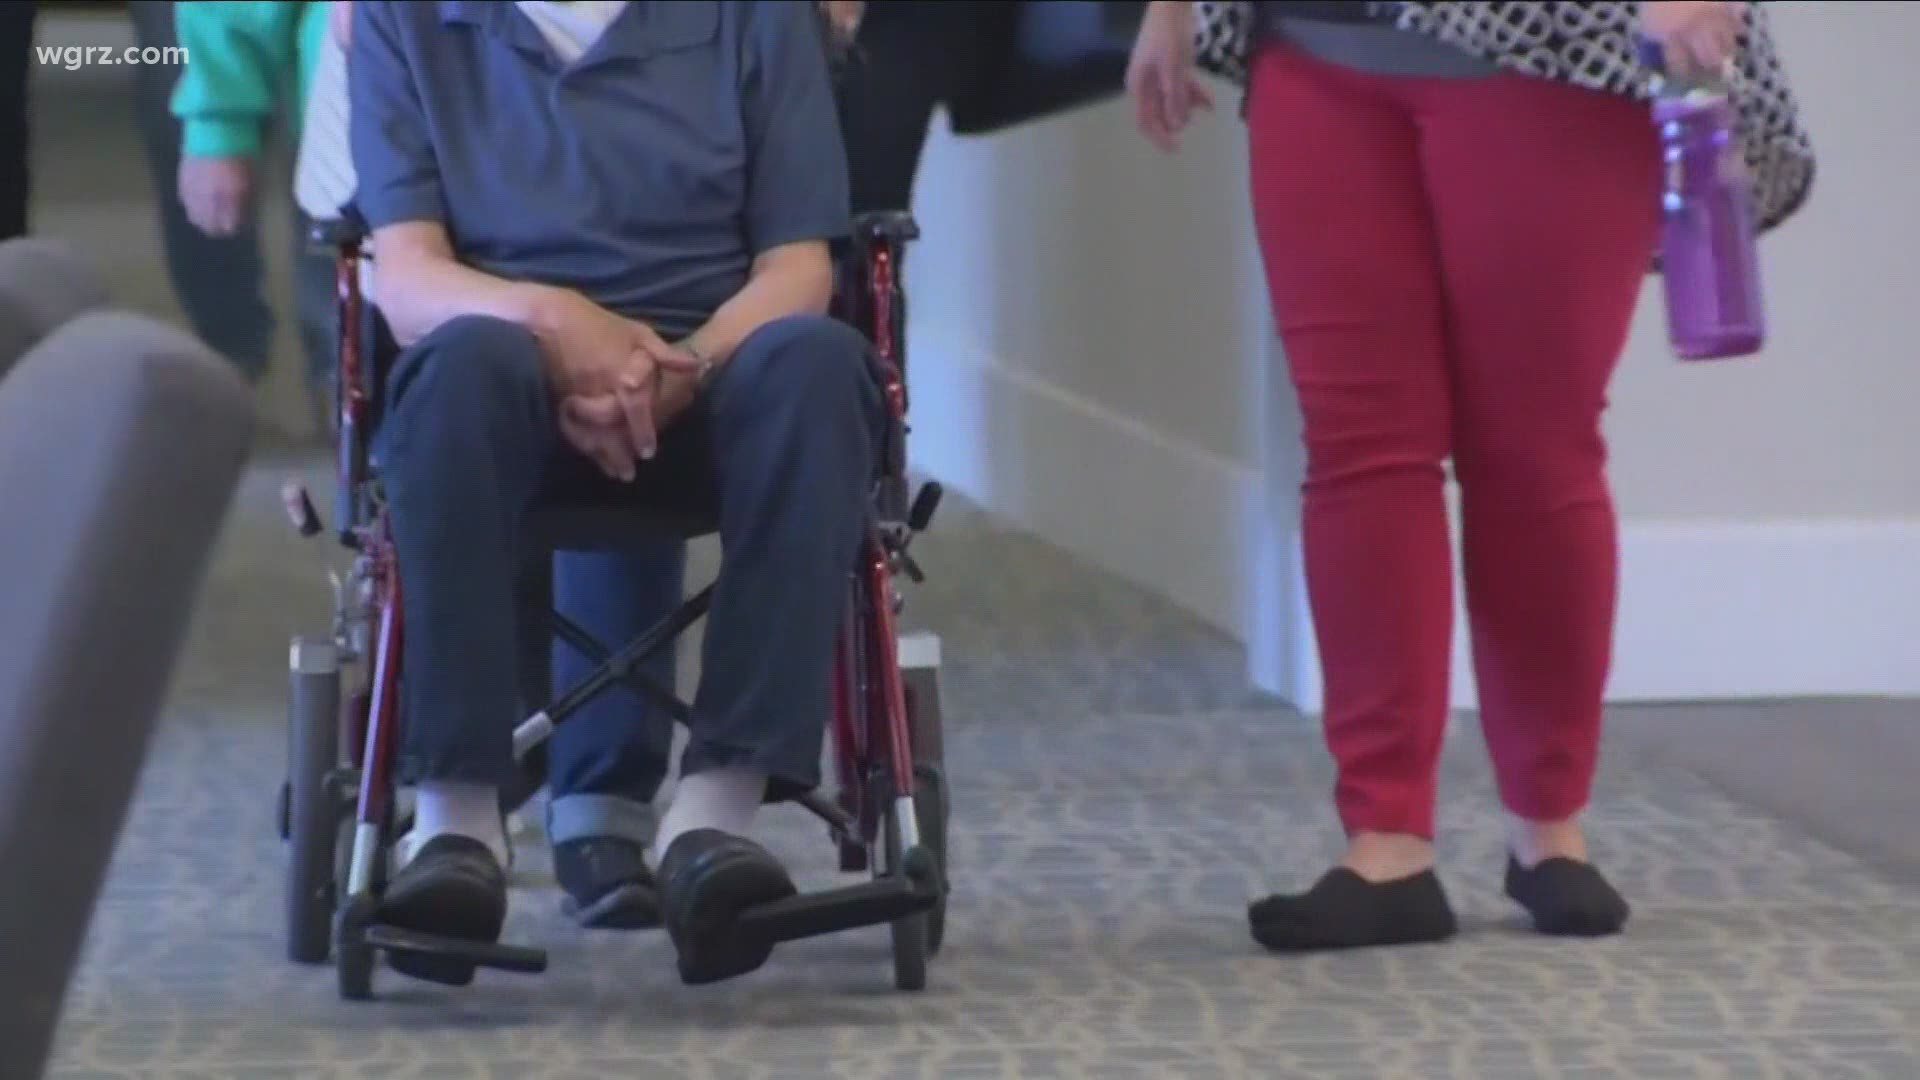 DOJ says it's received information from states and after a review says it will not open up a civil rights investigation into the state's handling on nursing homes.